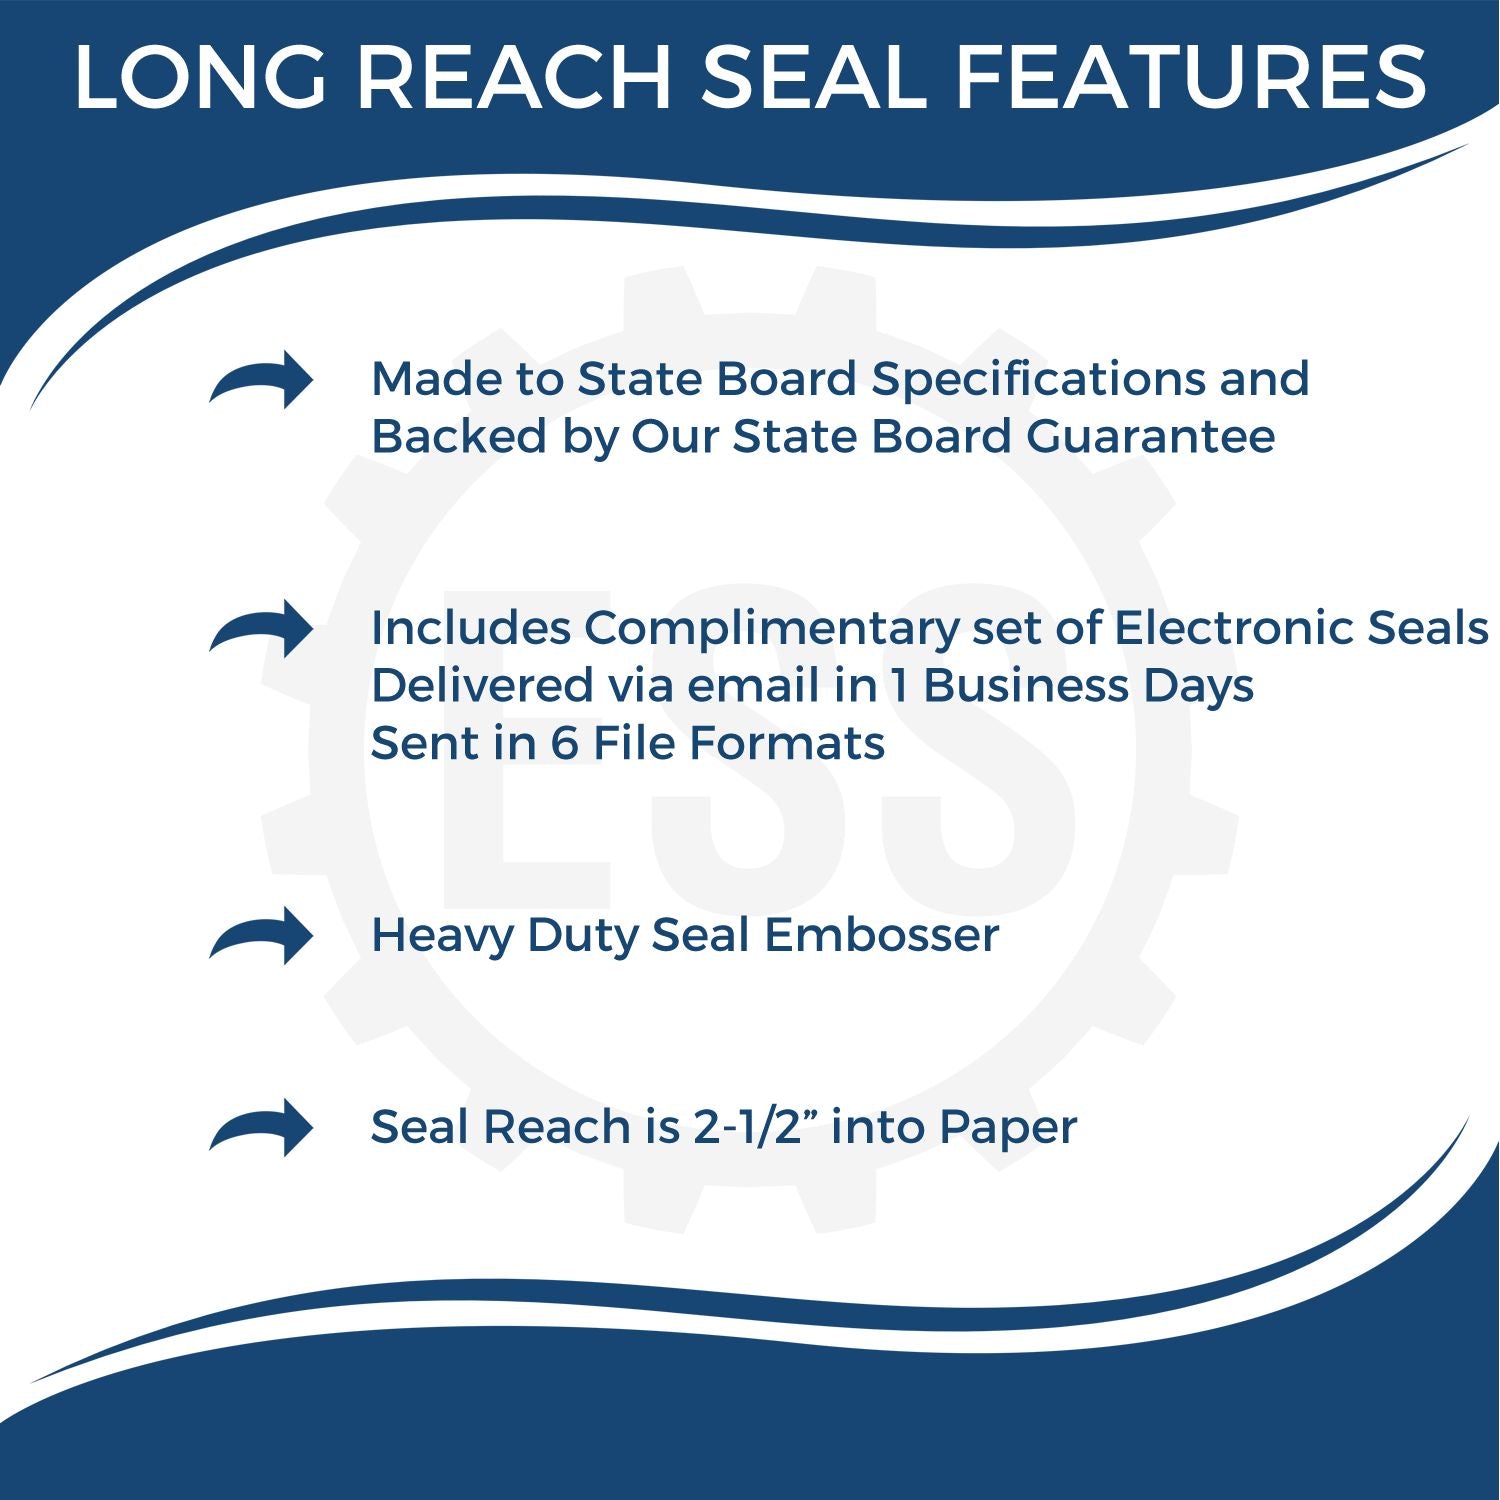 The main image for the Long Reach Iowa PE Seal depicting a sample of the imprint and electronic files